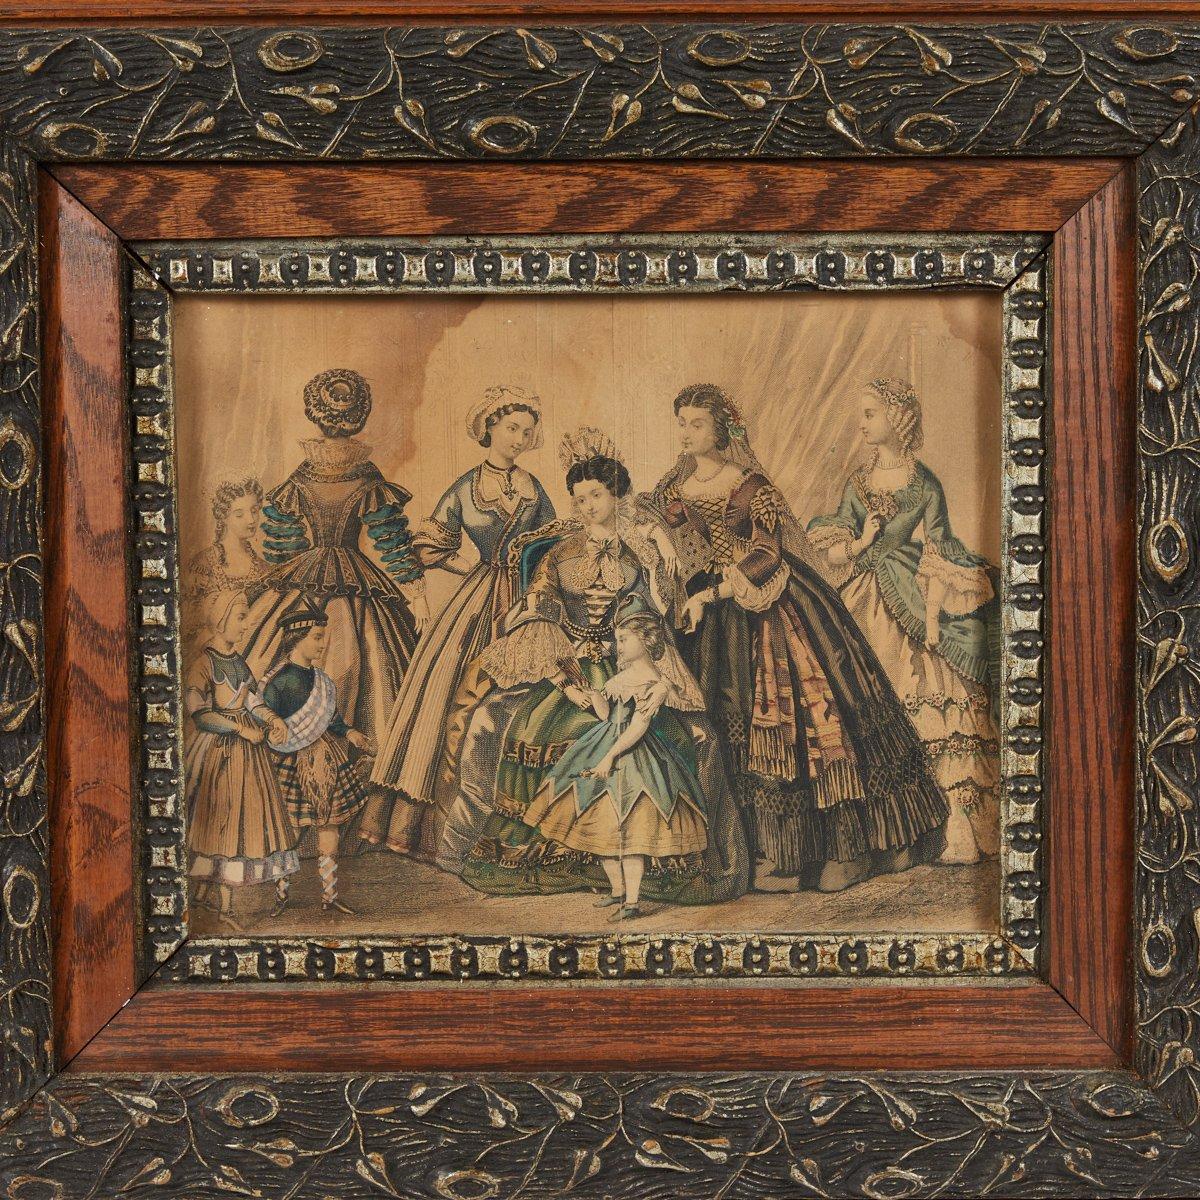 Early Victorian fashion plate print in a richly carved rectangular oak wood frame. Both the frame and image show a marked attention to detail, and feature delicate lines and a muted color palette. 

England, circa 1880

Dimensions: 18.5W x 2D x 16.5H